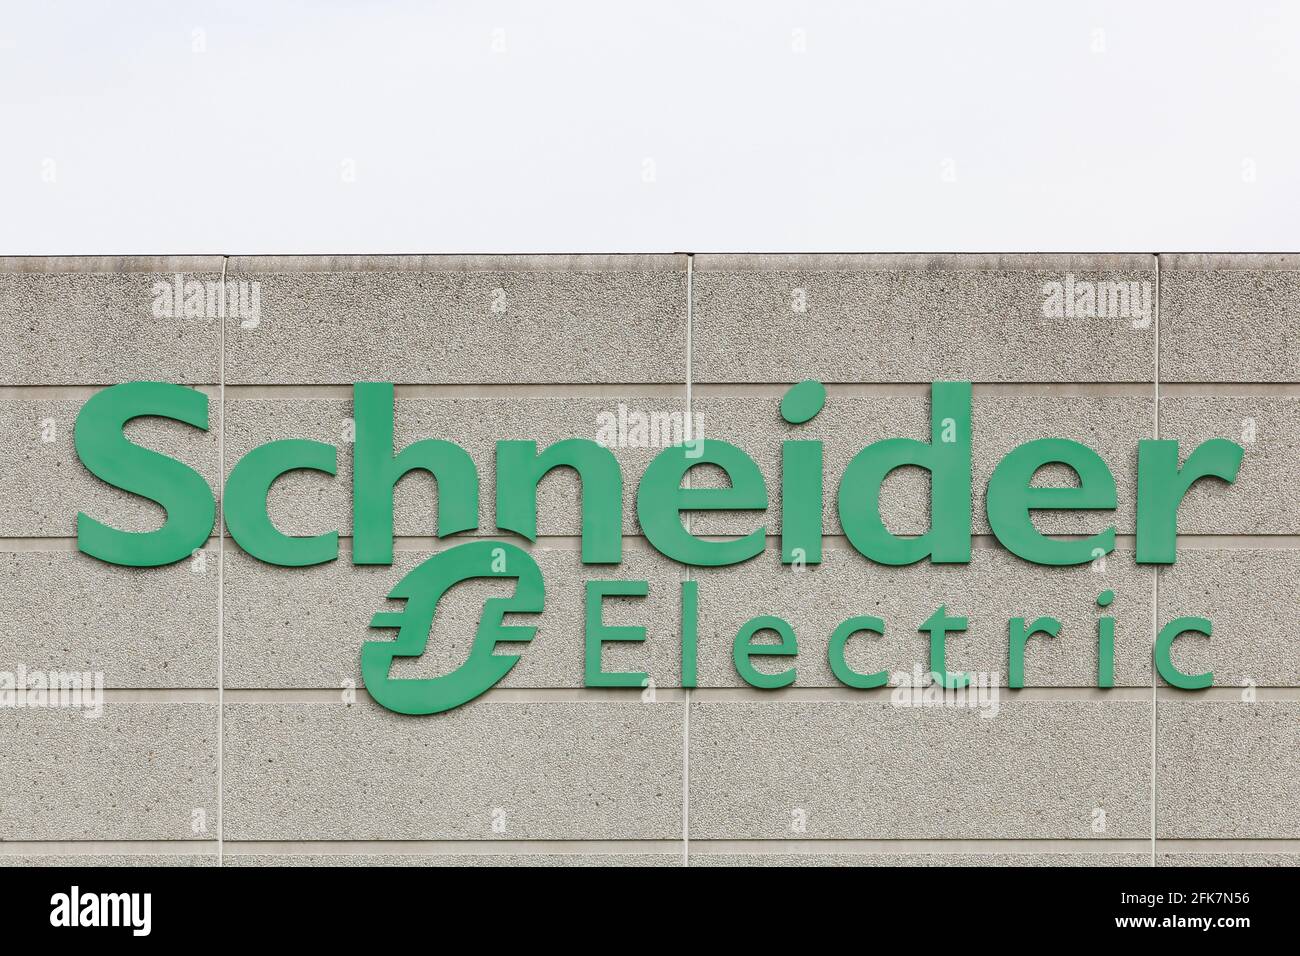 Kolding, Denmark - May 29, 2016: Schneider Electric logo on a facade. Schneider Electric is a leader in automation and electricity management Stock Photo